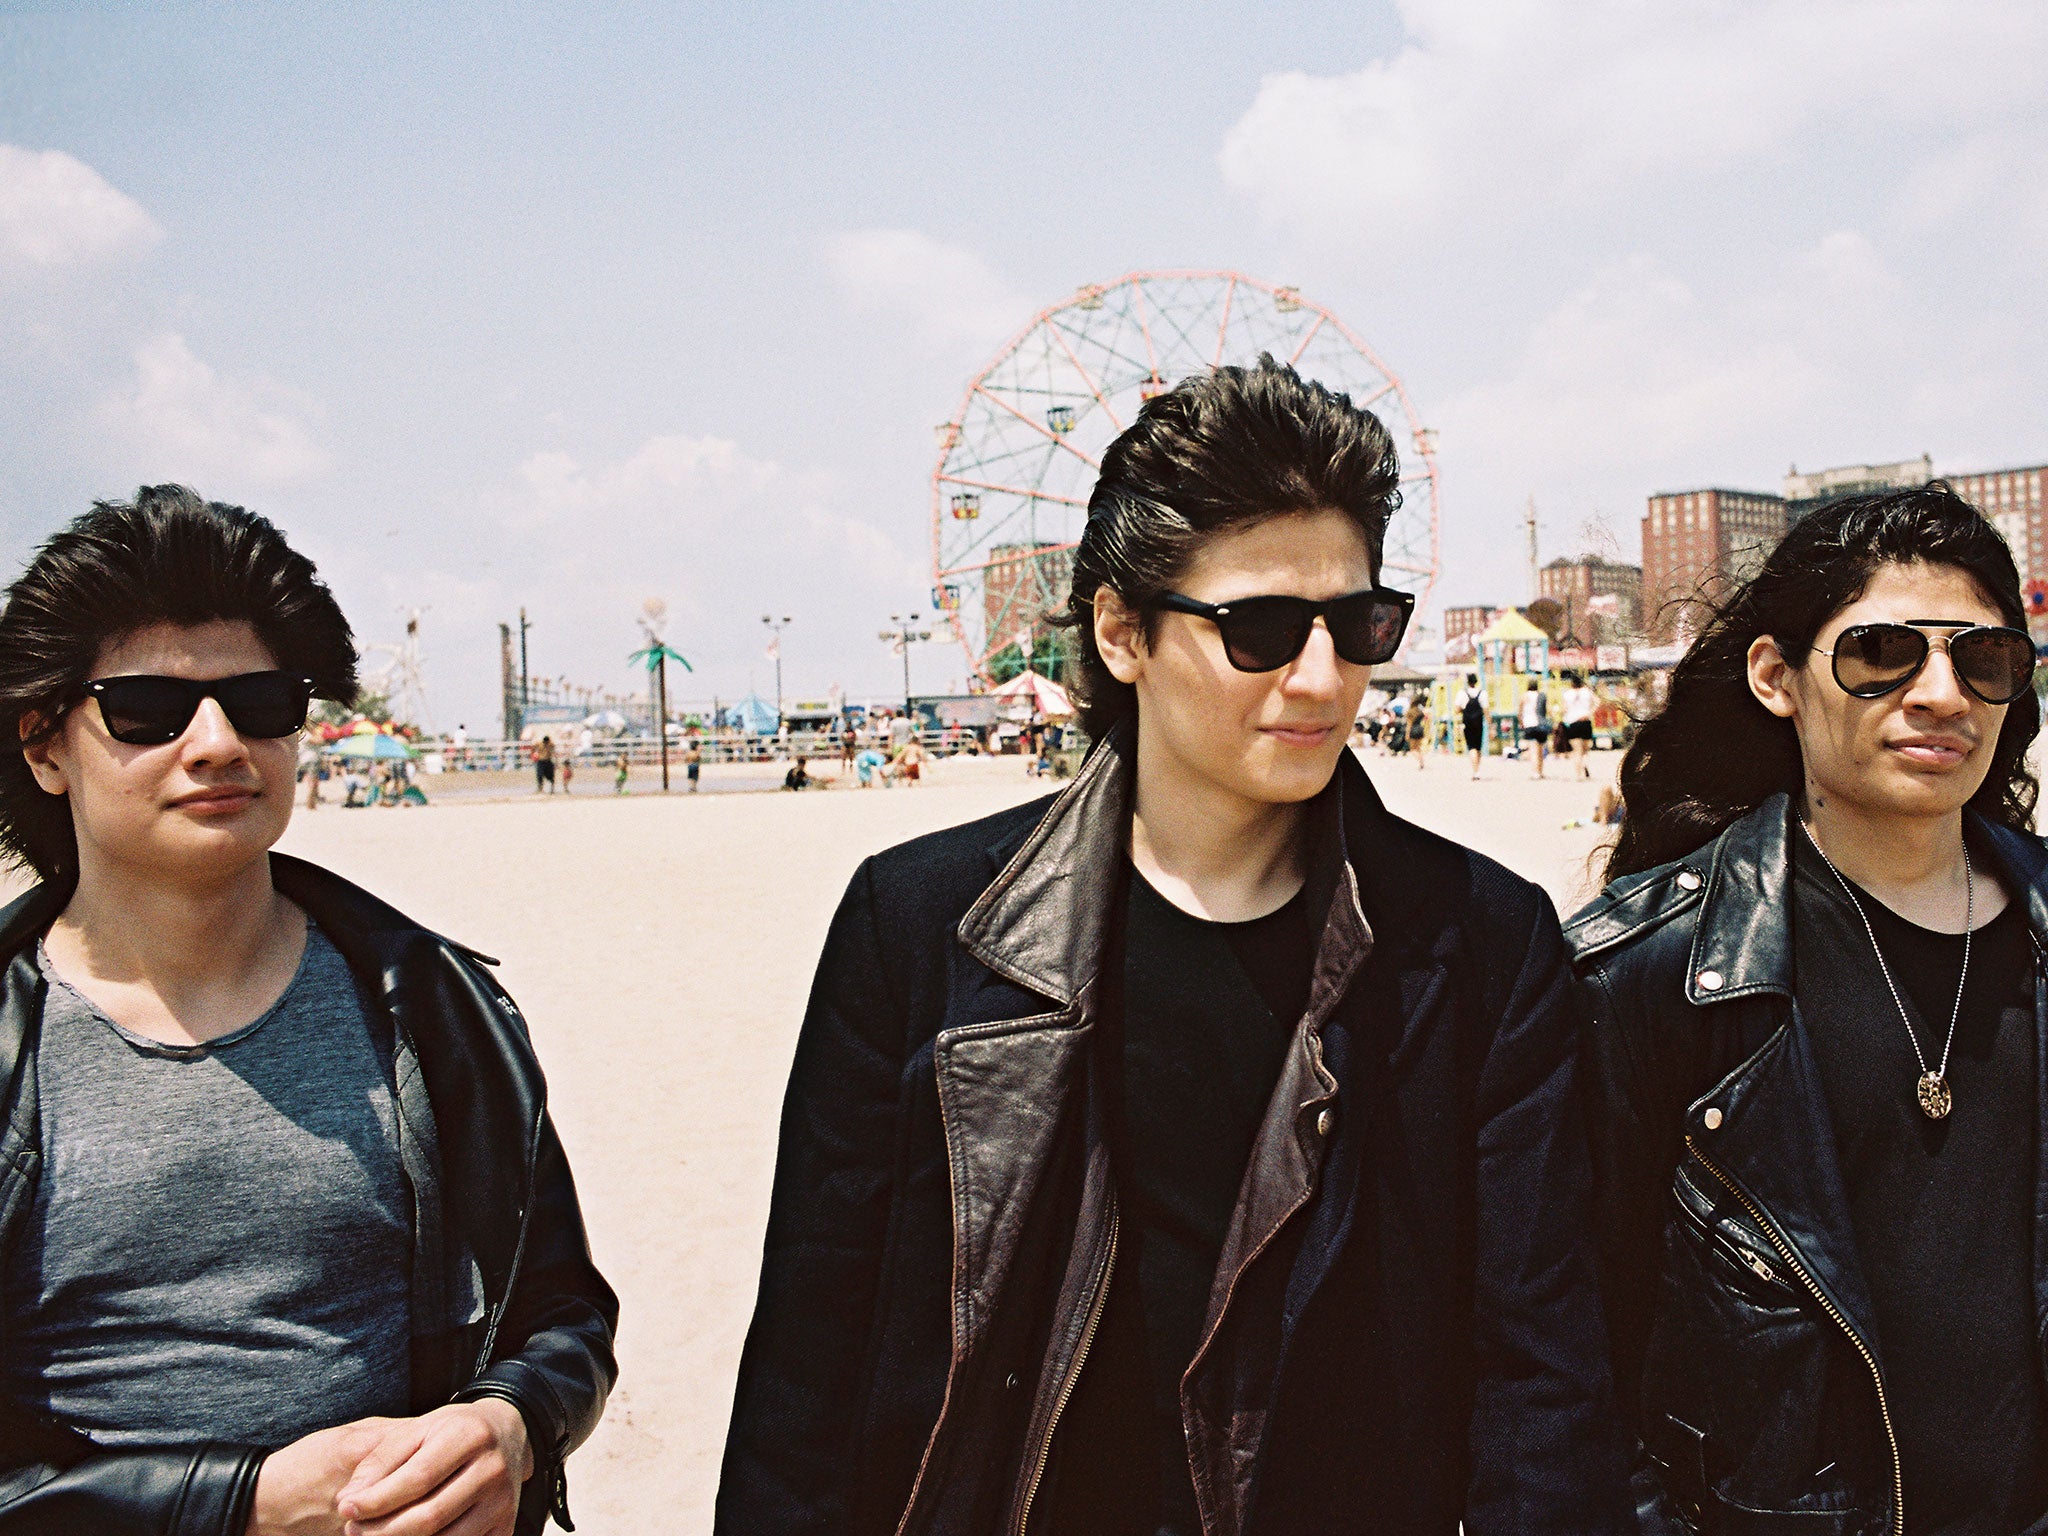 The Angulo brothers in Crystal Moselle’s New York-set documentary ‘The Wolfpack’